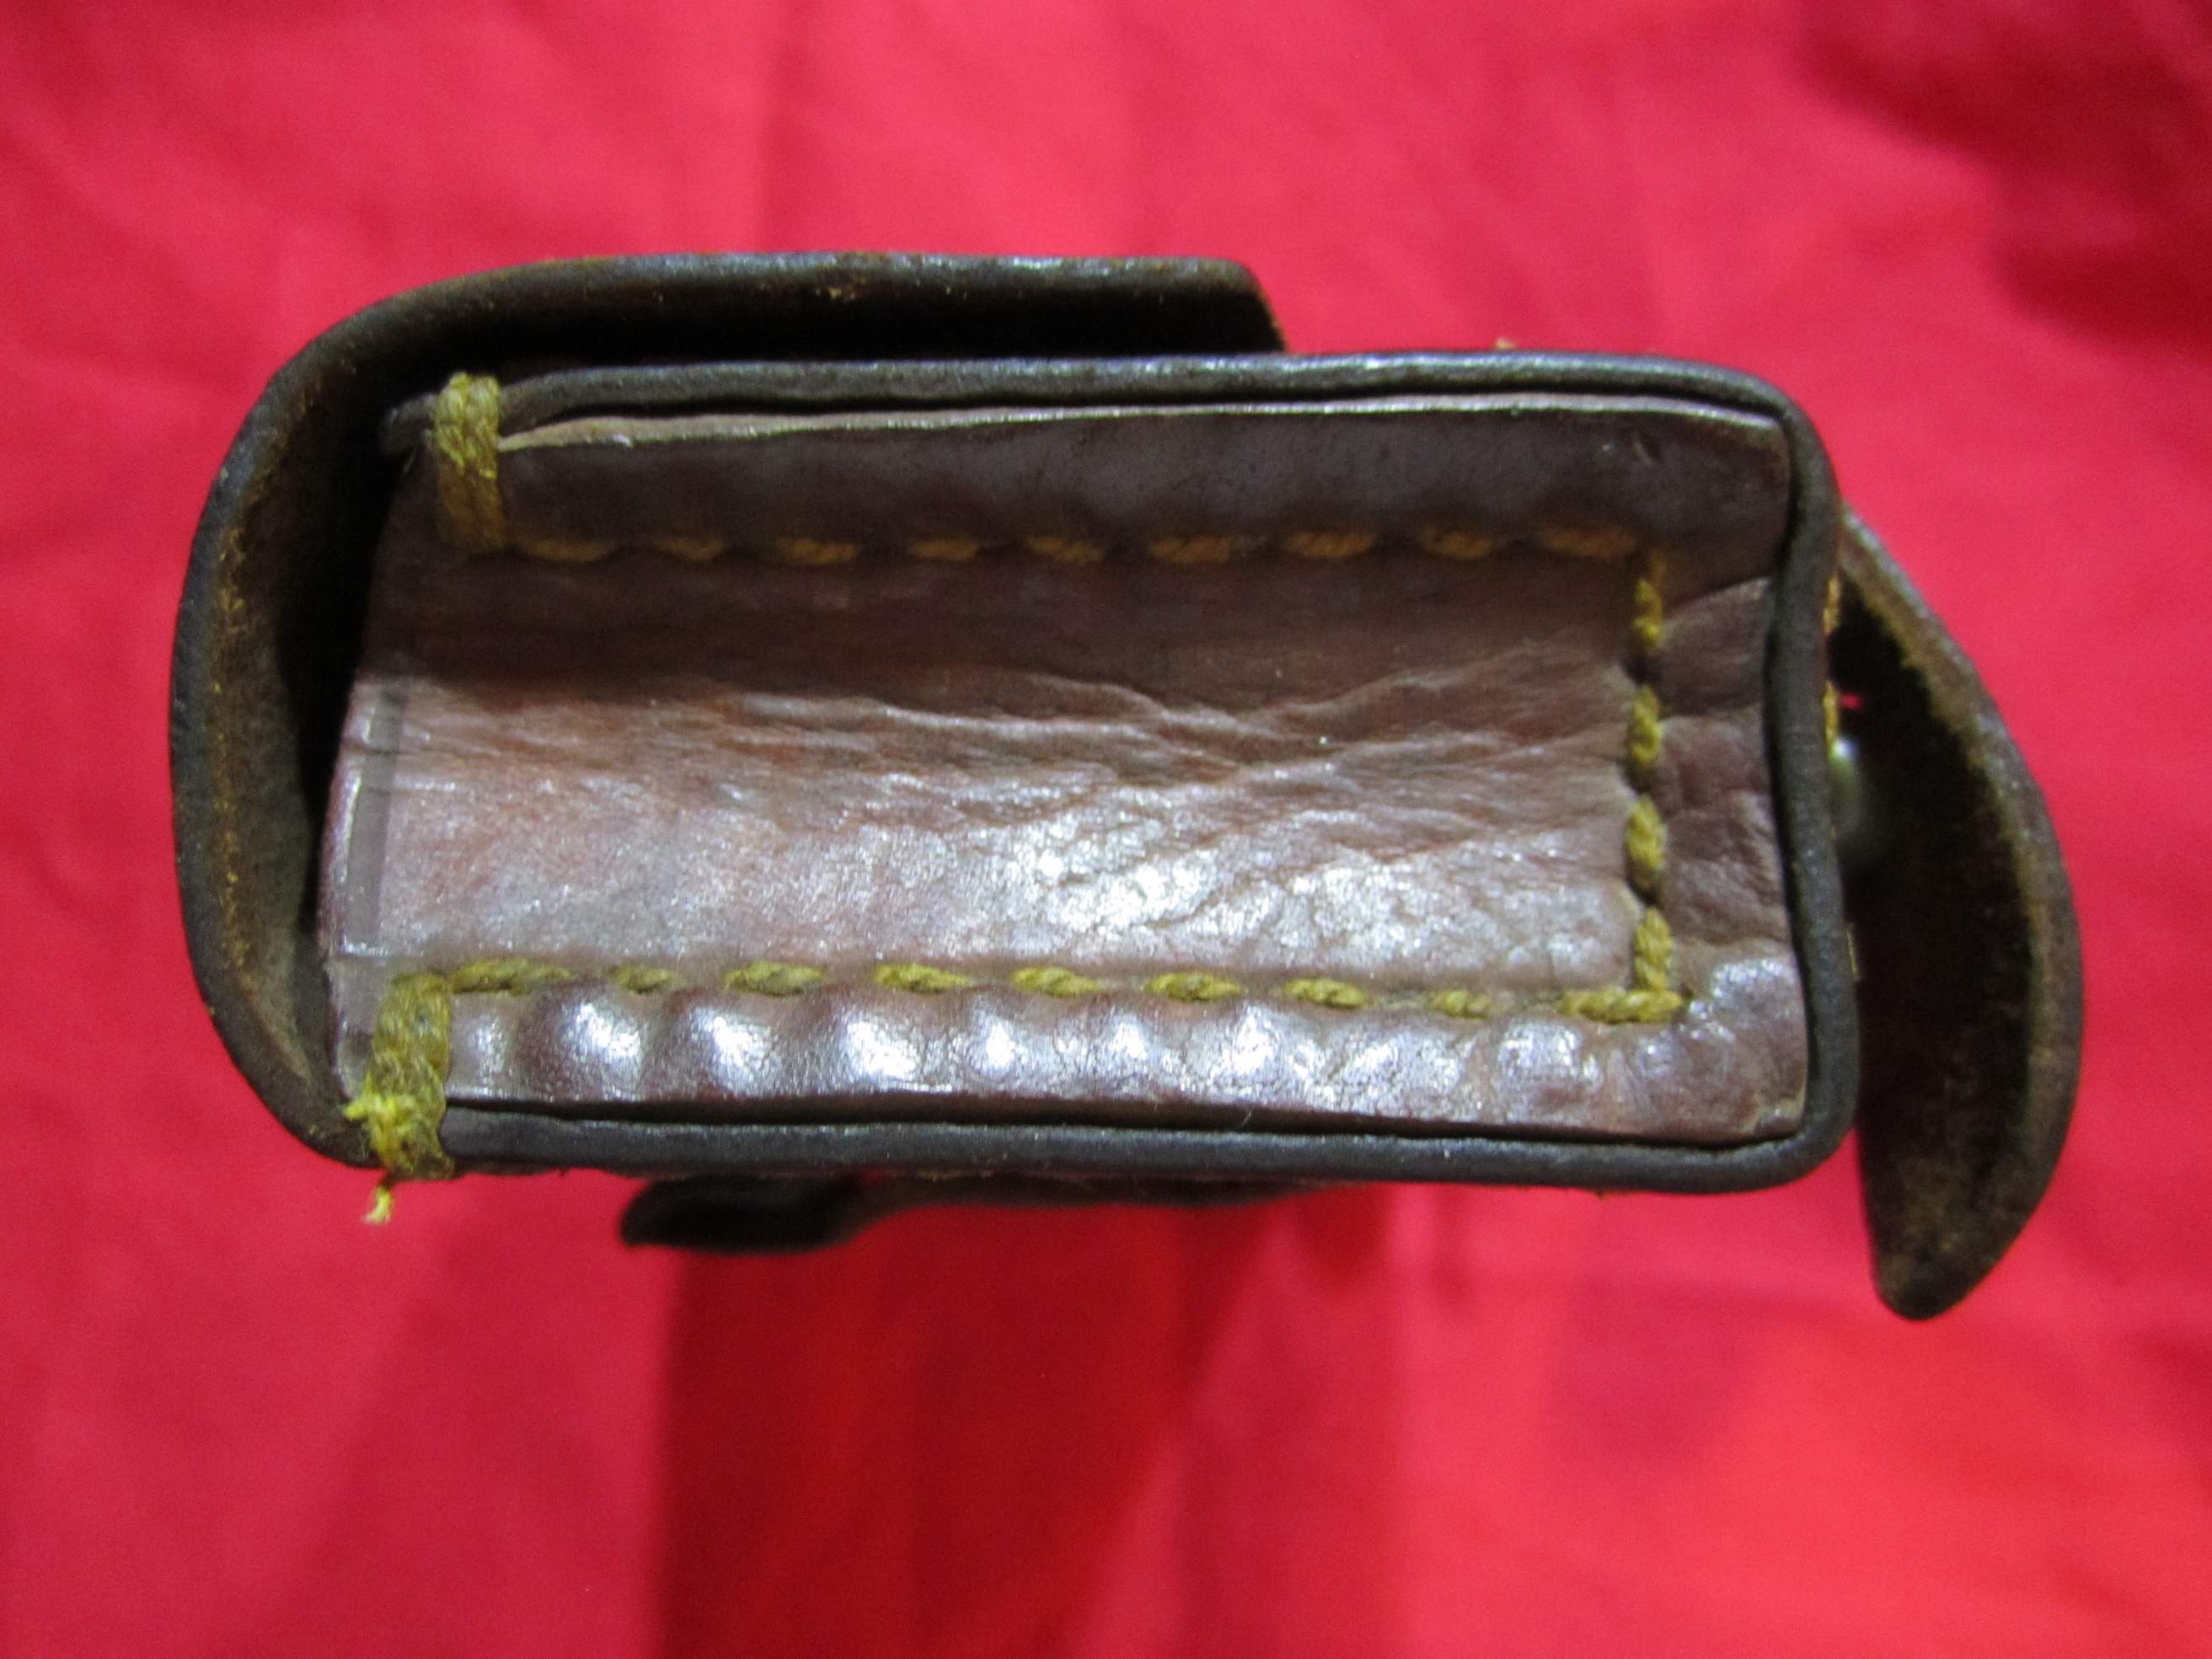 Japanese ammo pouch for Small Mauser type pistol